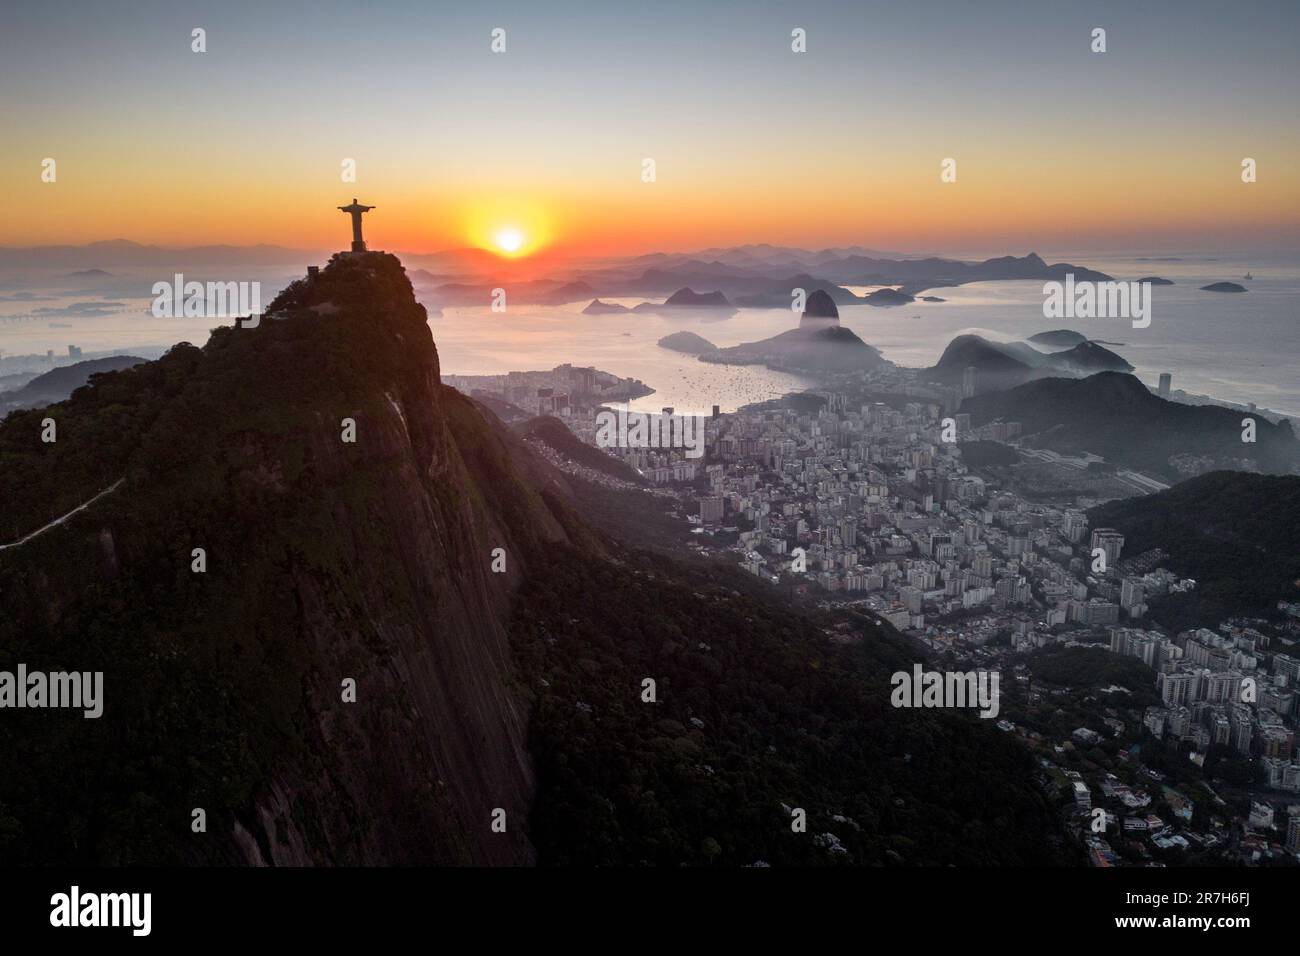 Rio de Janeiro, Brazil - June 10, 2023: Christ the Redeemer statue on top of Corcovado Mountain with the Sugarloaf Mountain in the horizon on sunrise. Stock Photo